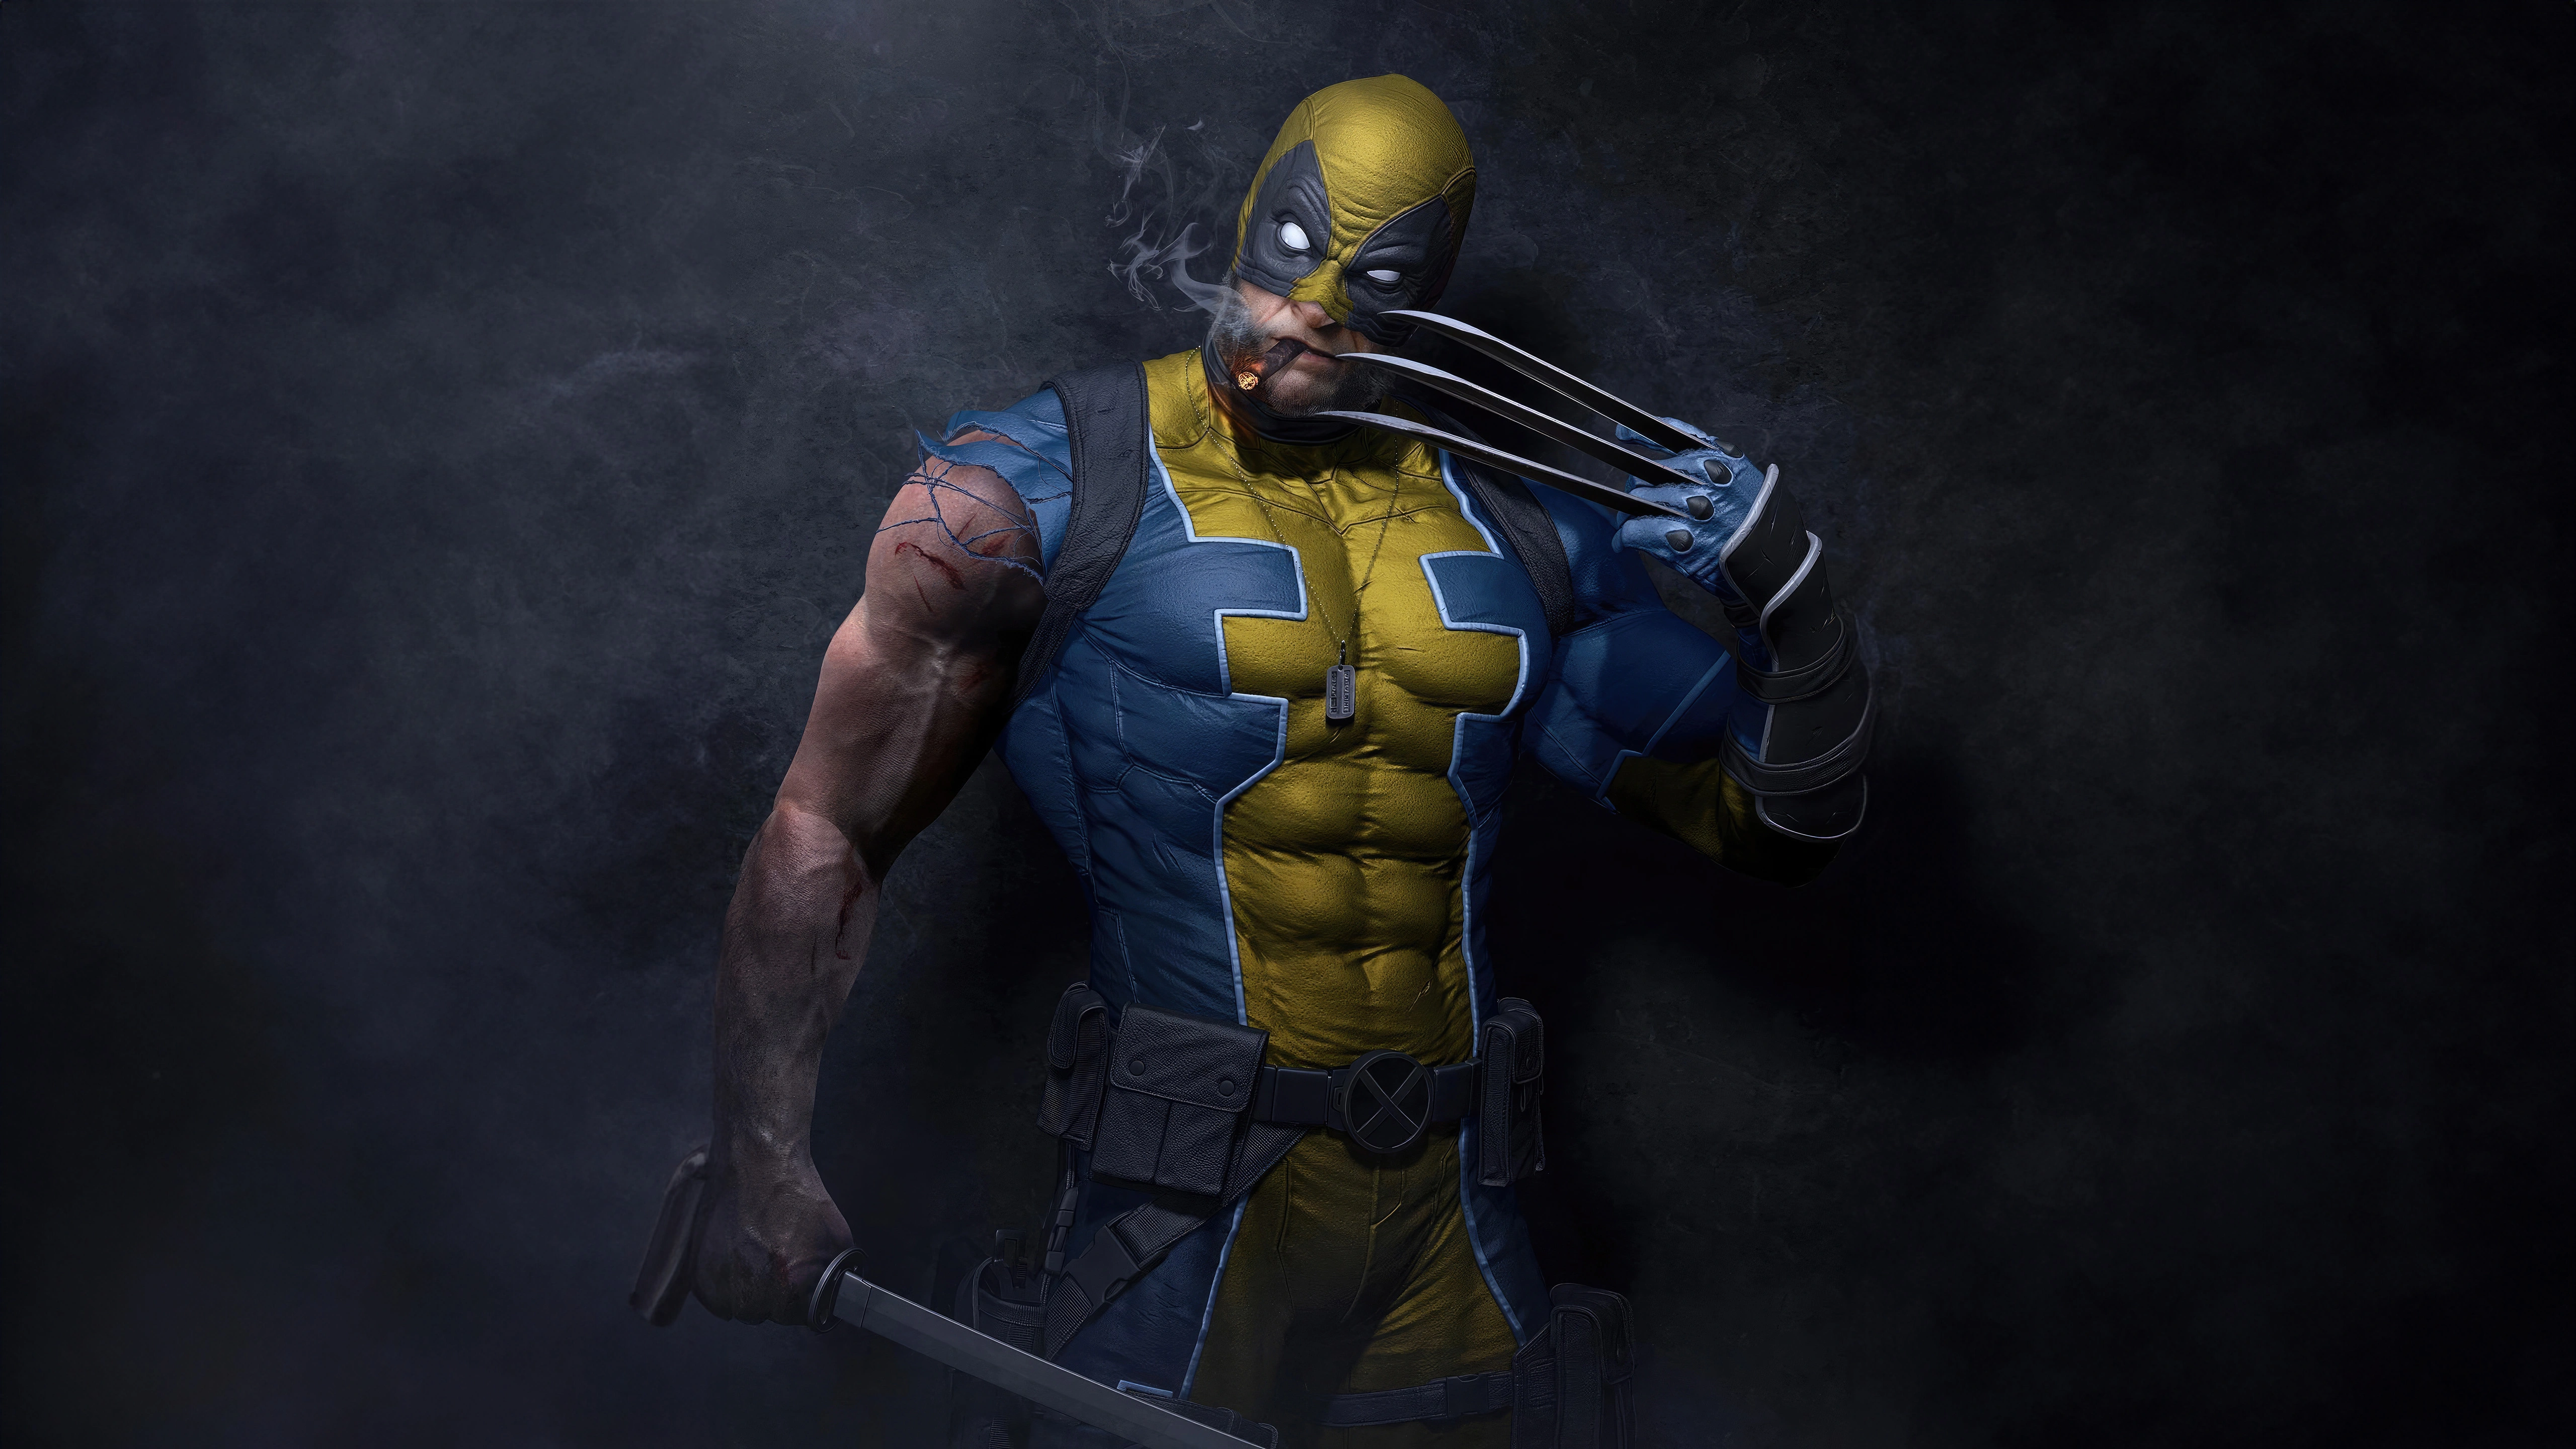 wolverine cigar and claws i2.jpg